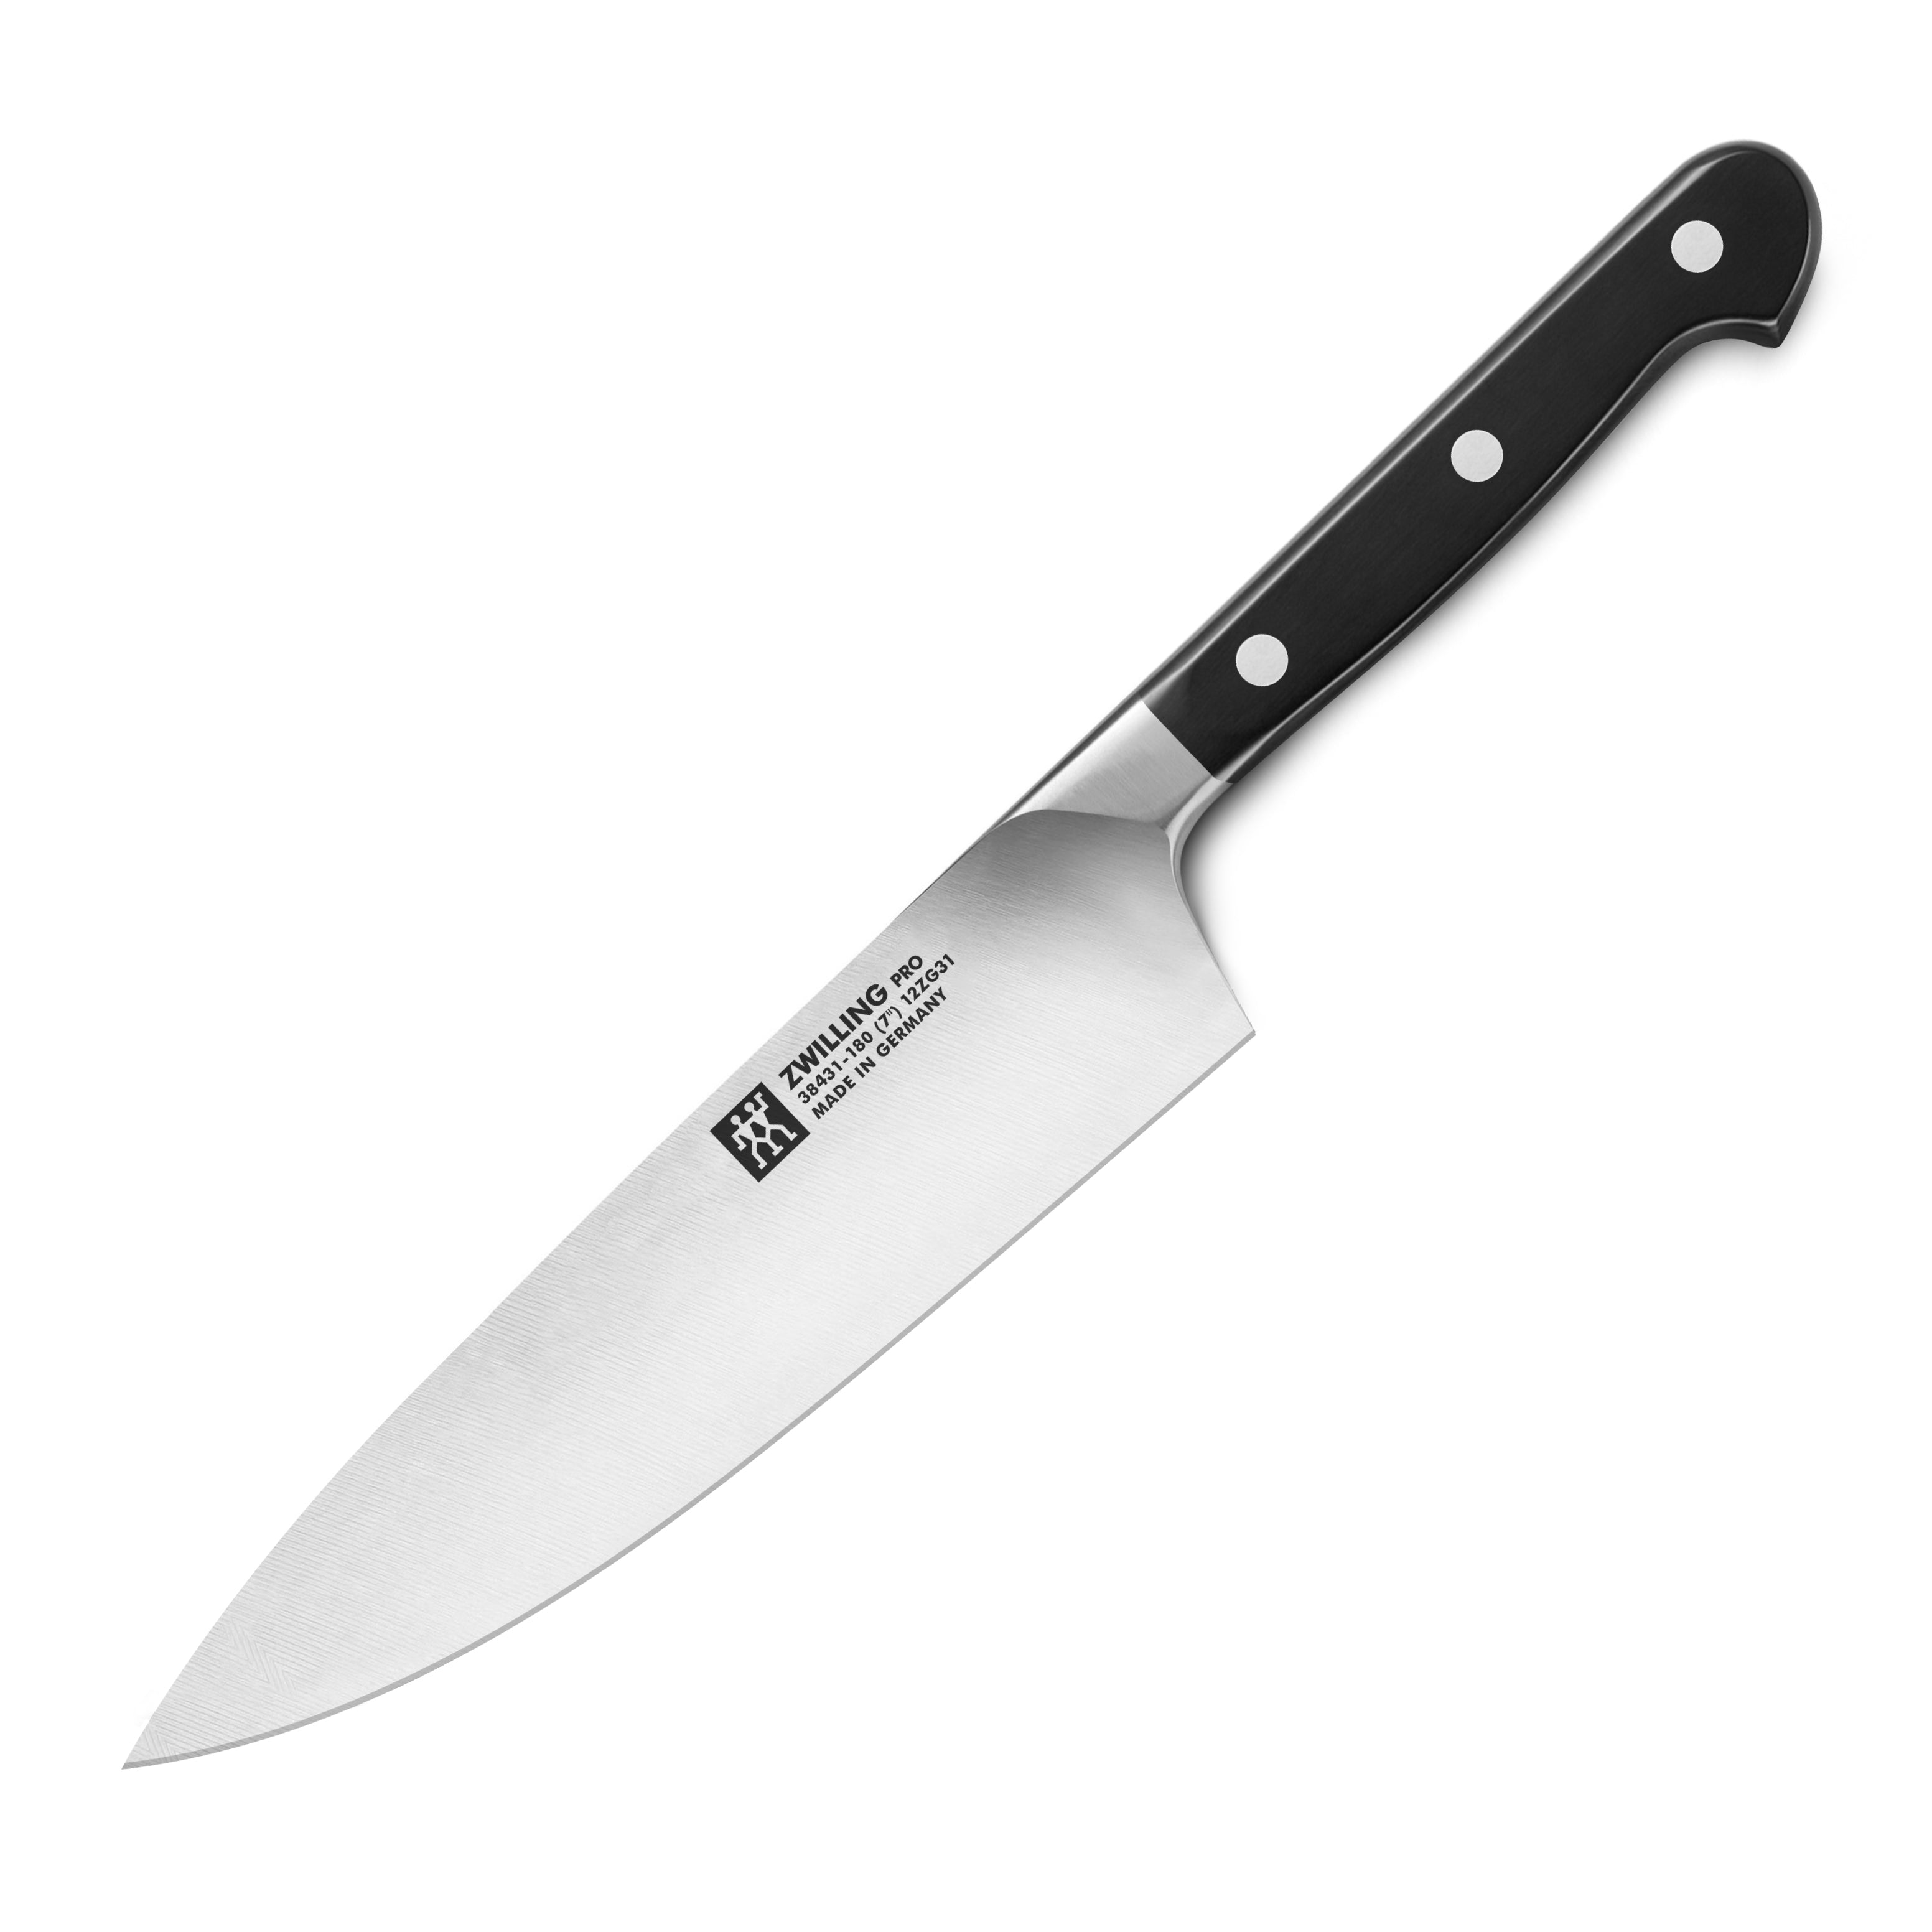 Zwilling Memorial Day Sale 2023: Knife Deals